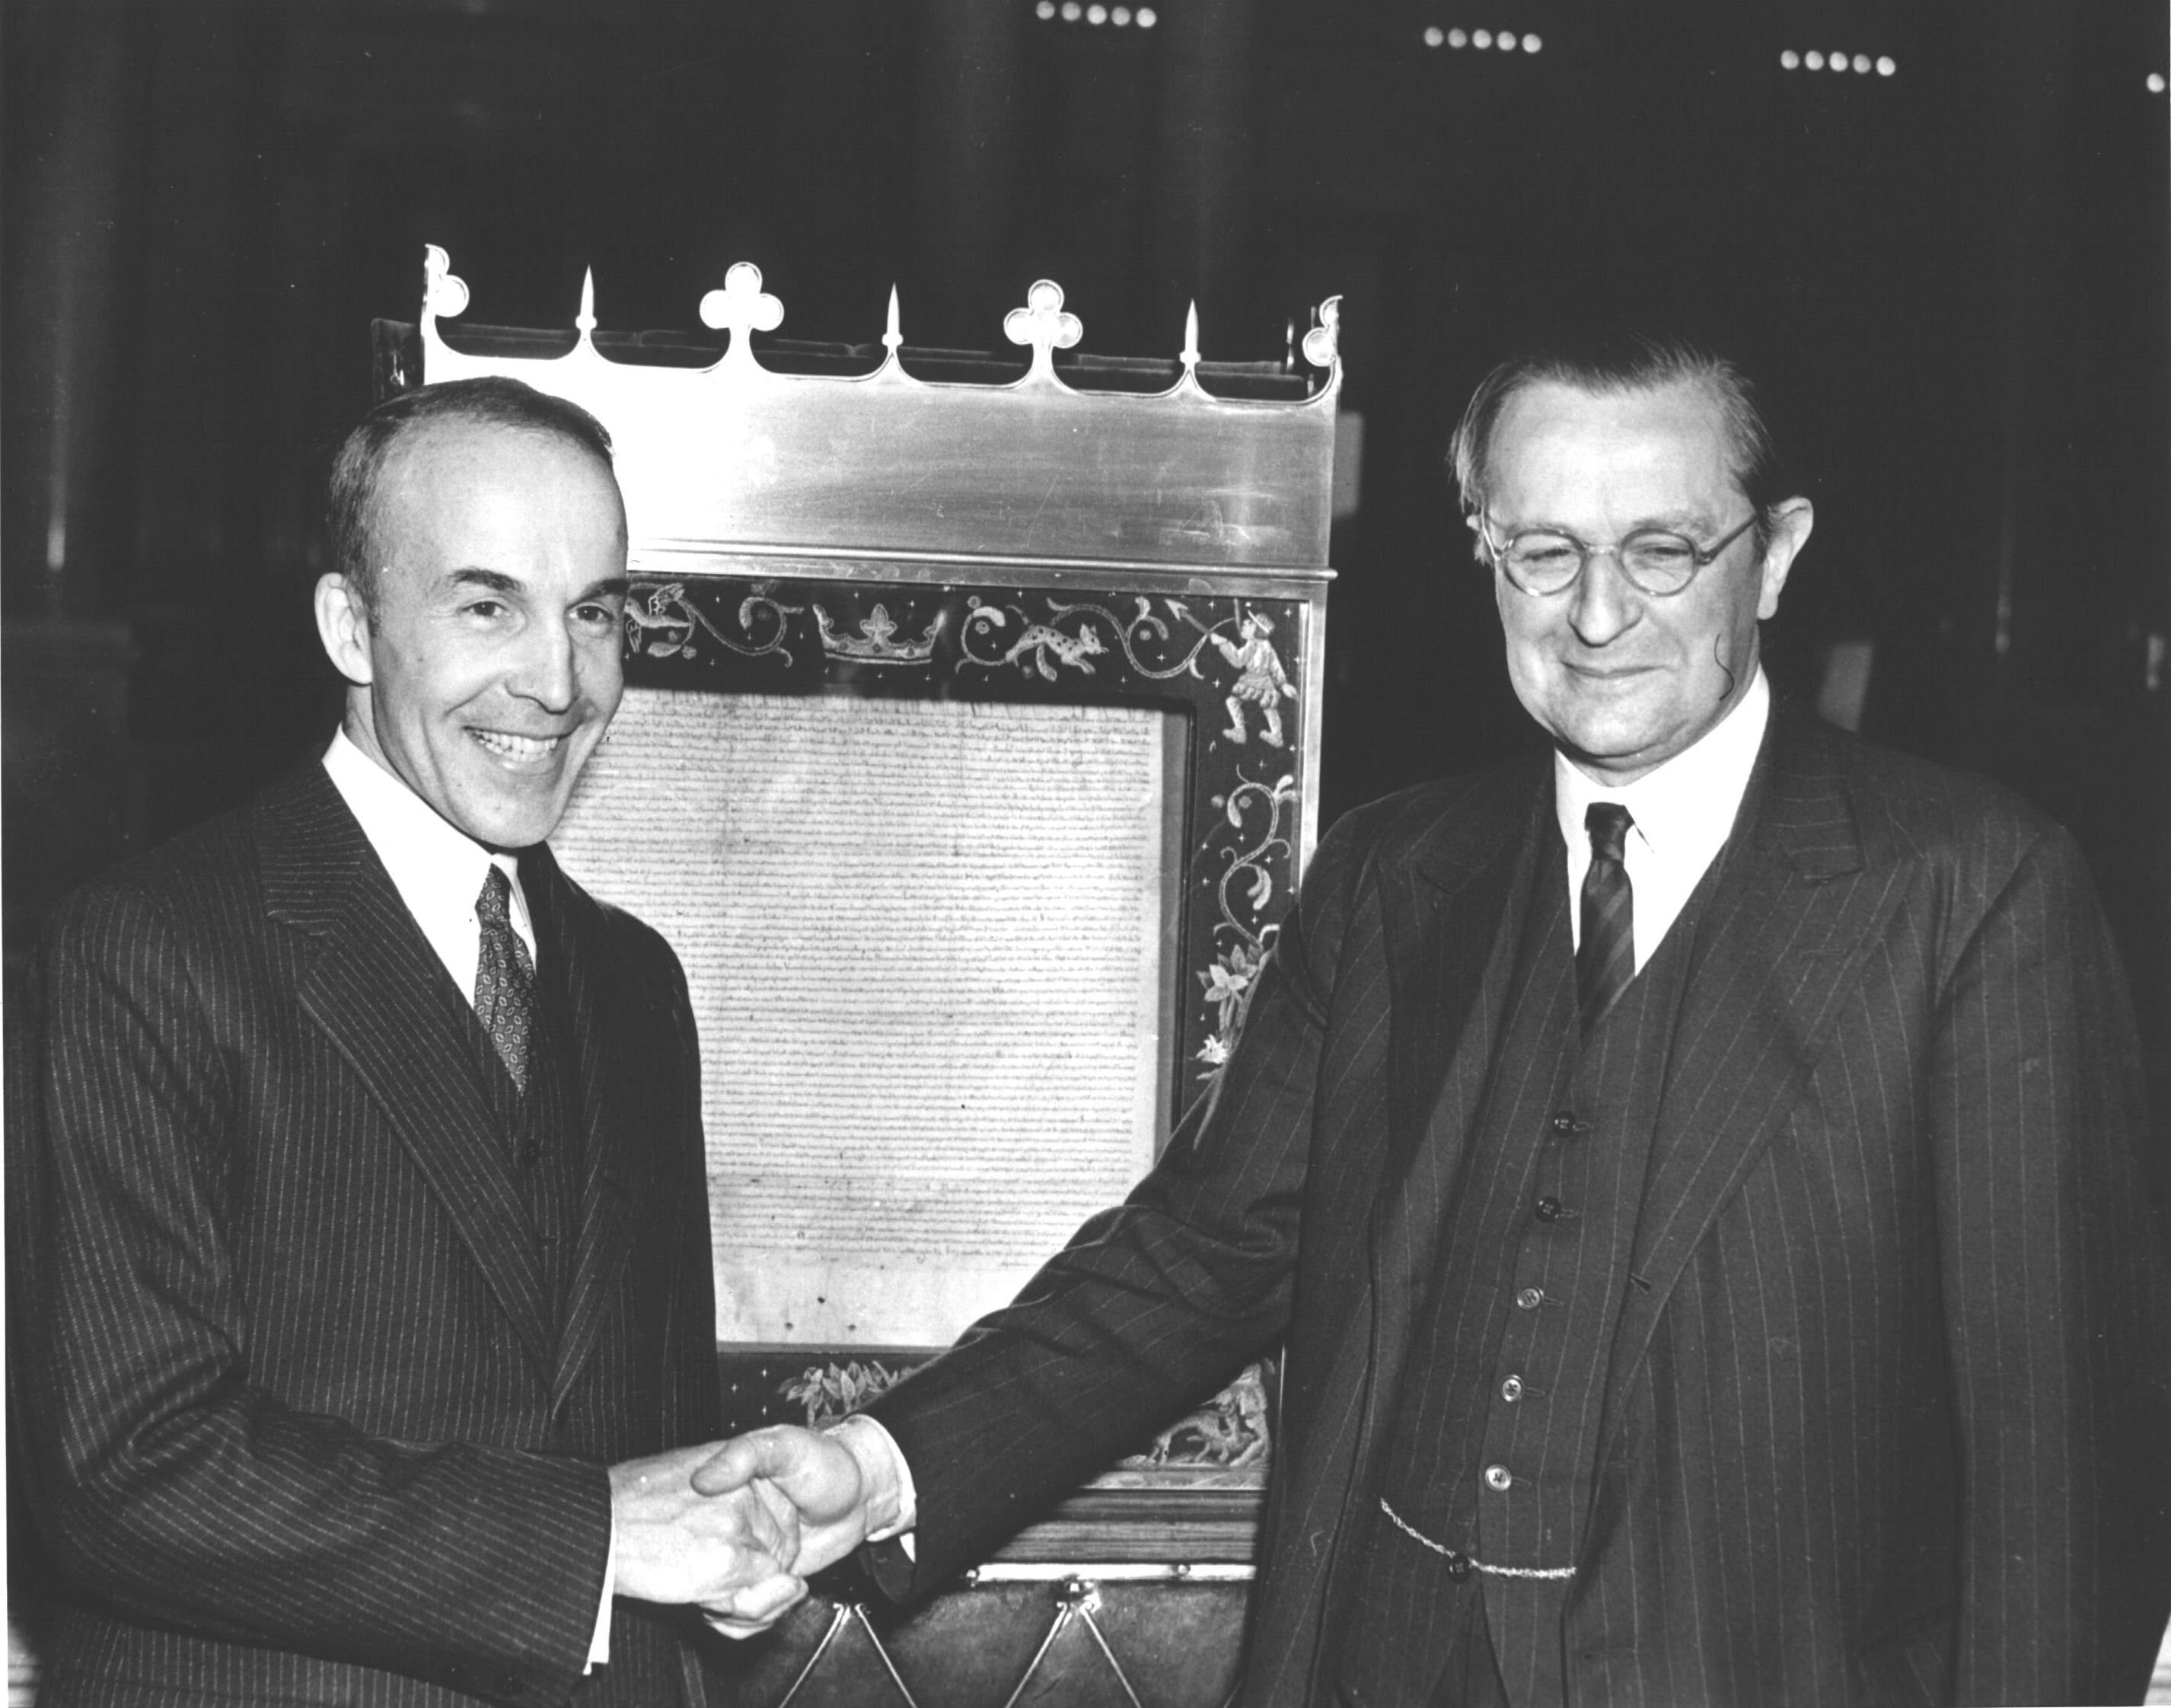 Head of the United States Library of Congress Archibald MacLeish and British Ambassador Lord Lothian posing in front of the Magna Carta, Washington, DC, United States, 28 Nov 1939